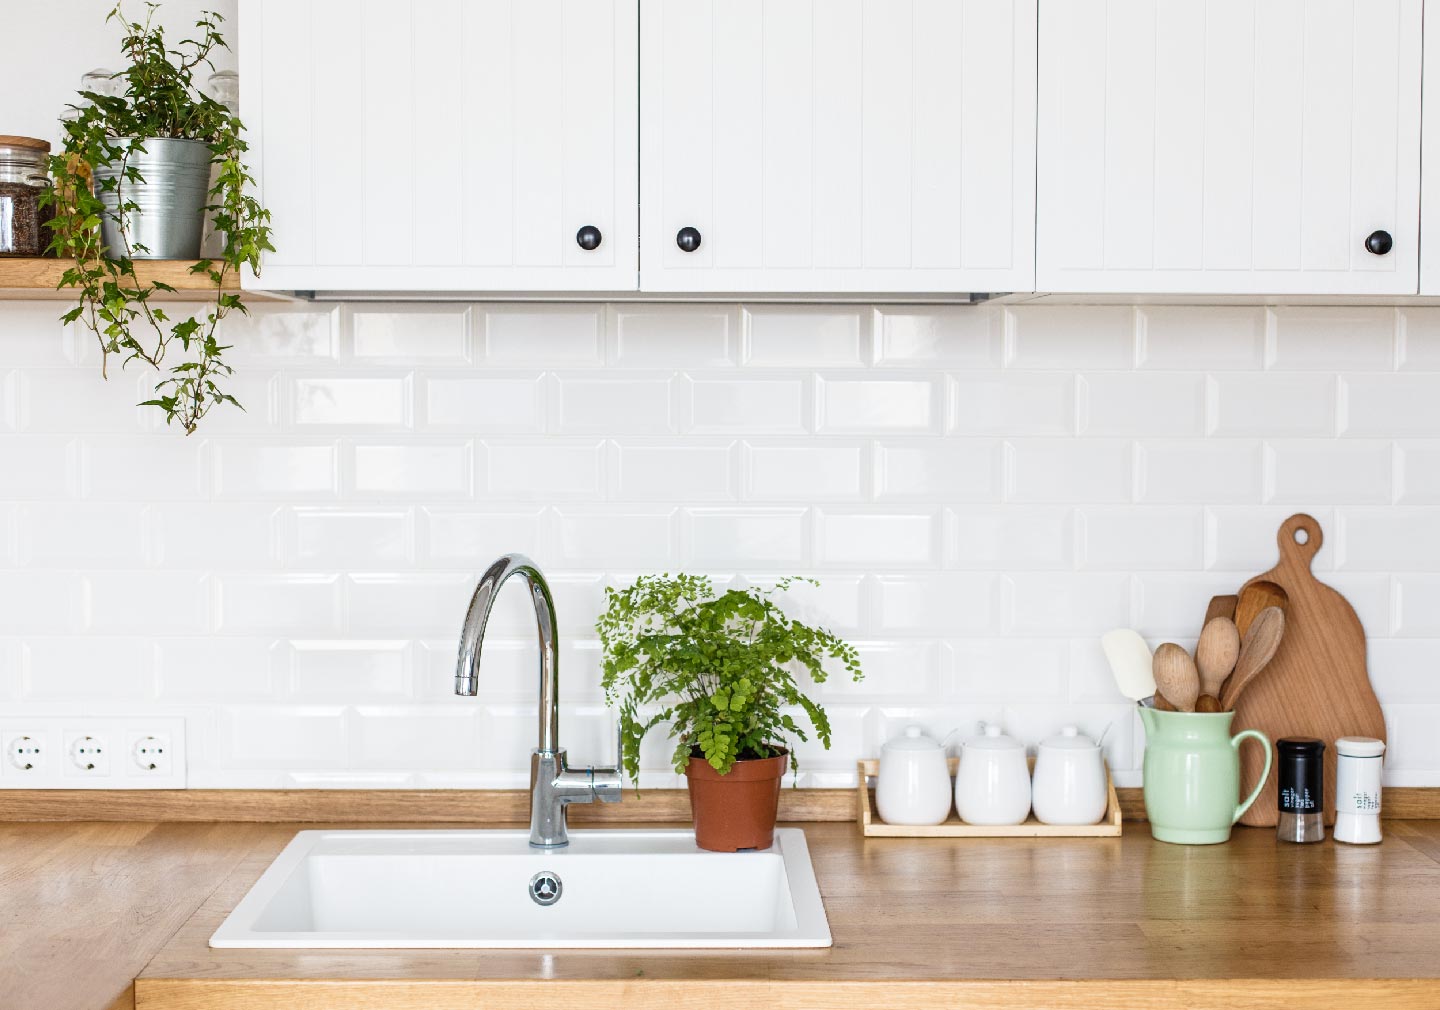 Functionality and Features of a kitchen sink